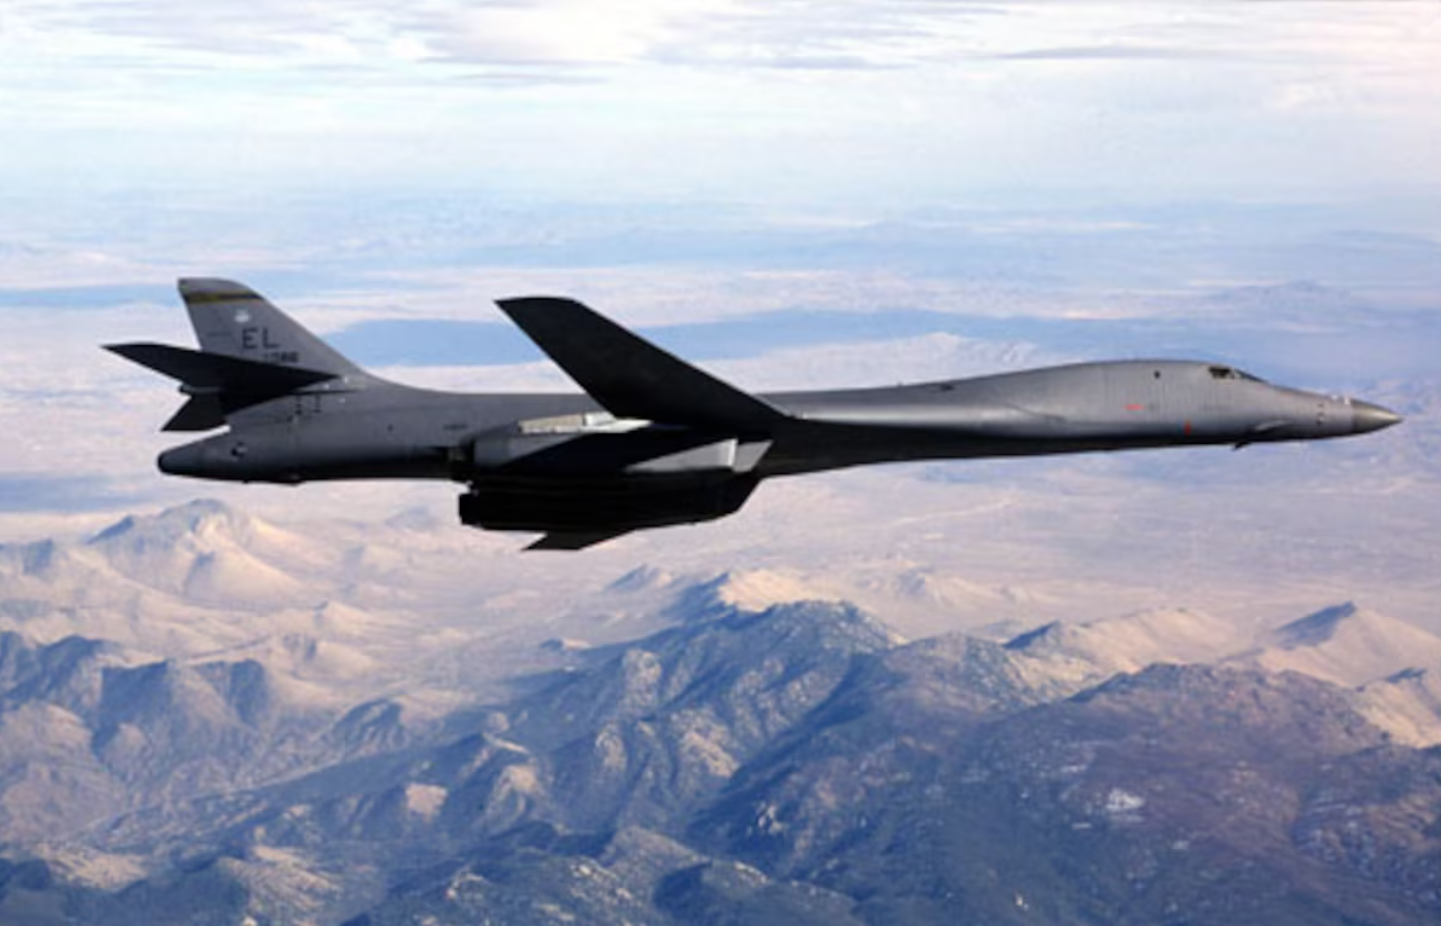 A black B-1B Lancer bomber is seen flying above a mountainous region. The mountains' land have colors ranging from forest's greens to desert yellows and whites. The sky above is cloudy and white.